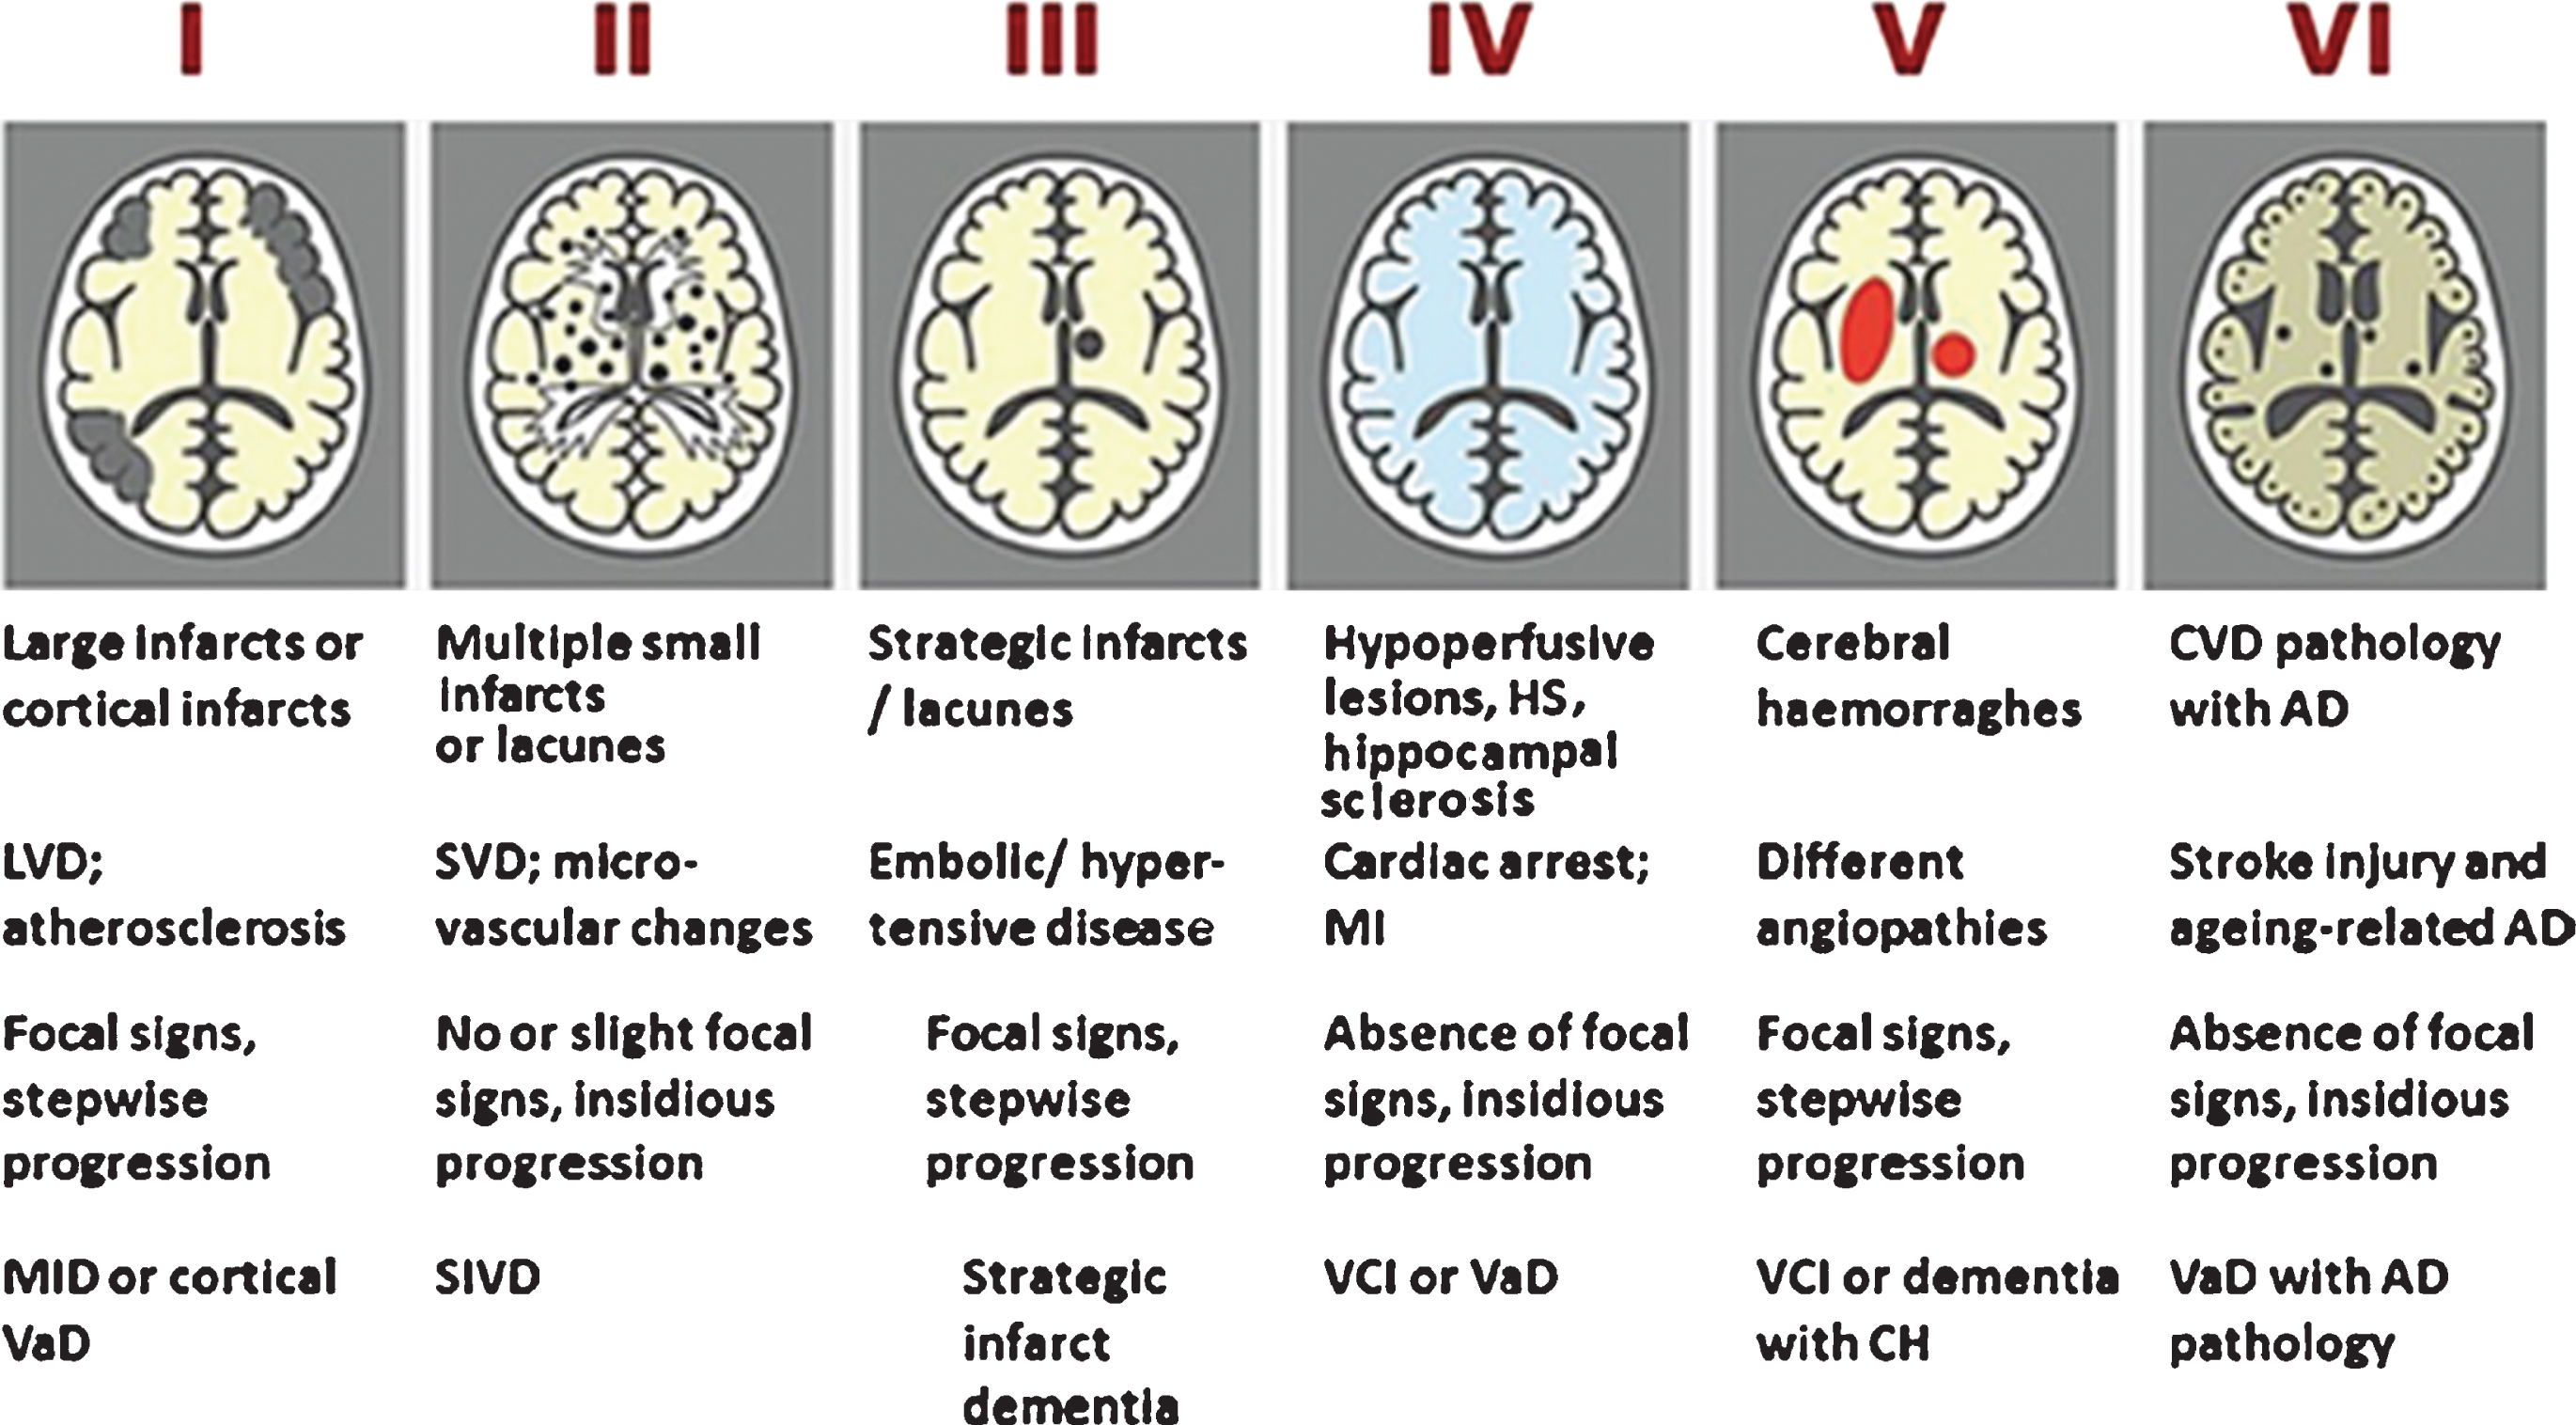 Newcastle categorization in six subtypes of different cerebrovascular pathologies associated with VCI. Post-stroke survivors are included in subtypes I–III. Cases with extensive WM disease in the absence of significant other features are included under SVD. Subtype I may result from large vessel occlusion (athero-thromboembolism), artery-to-artery embolism or cardioembolism. Subtype II usually involves arteriosclerosis, lipohyalinosis and hypertensive, arteriosclerotic, amyloid or collagen angiopathy. Subtypes I, II and V may result from aneurysms, arterial dissections, arteriovenous malformations and various forms of arteritis (vasculitis). AD, Alzheimer’s disease; CH, cerebral haemorrhage; CVD, cerebrovascular disease; MI, myocardial infarction; MID, multi-infarct dementia; LVD, large vessel disease; SIVD, subcortical ischemic vascular dementia; SVD, small vessel disease; VCI, vascular cognitive impairment; VaD, vascular dementia. From: Kalaria RN, 2016 [13].